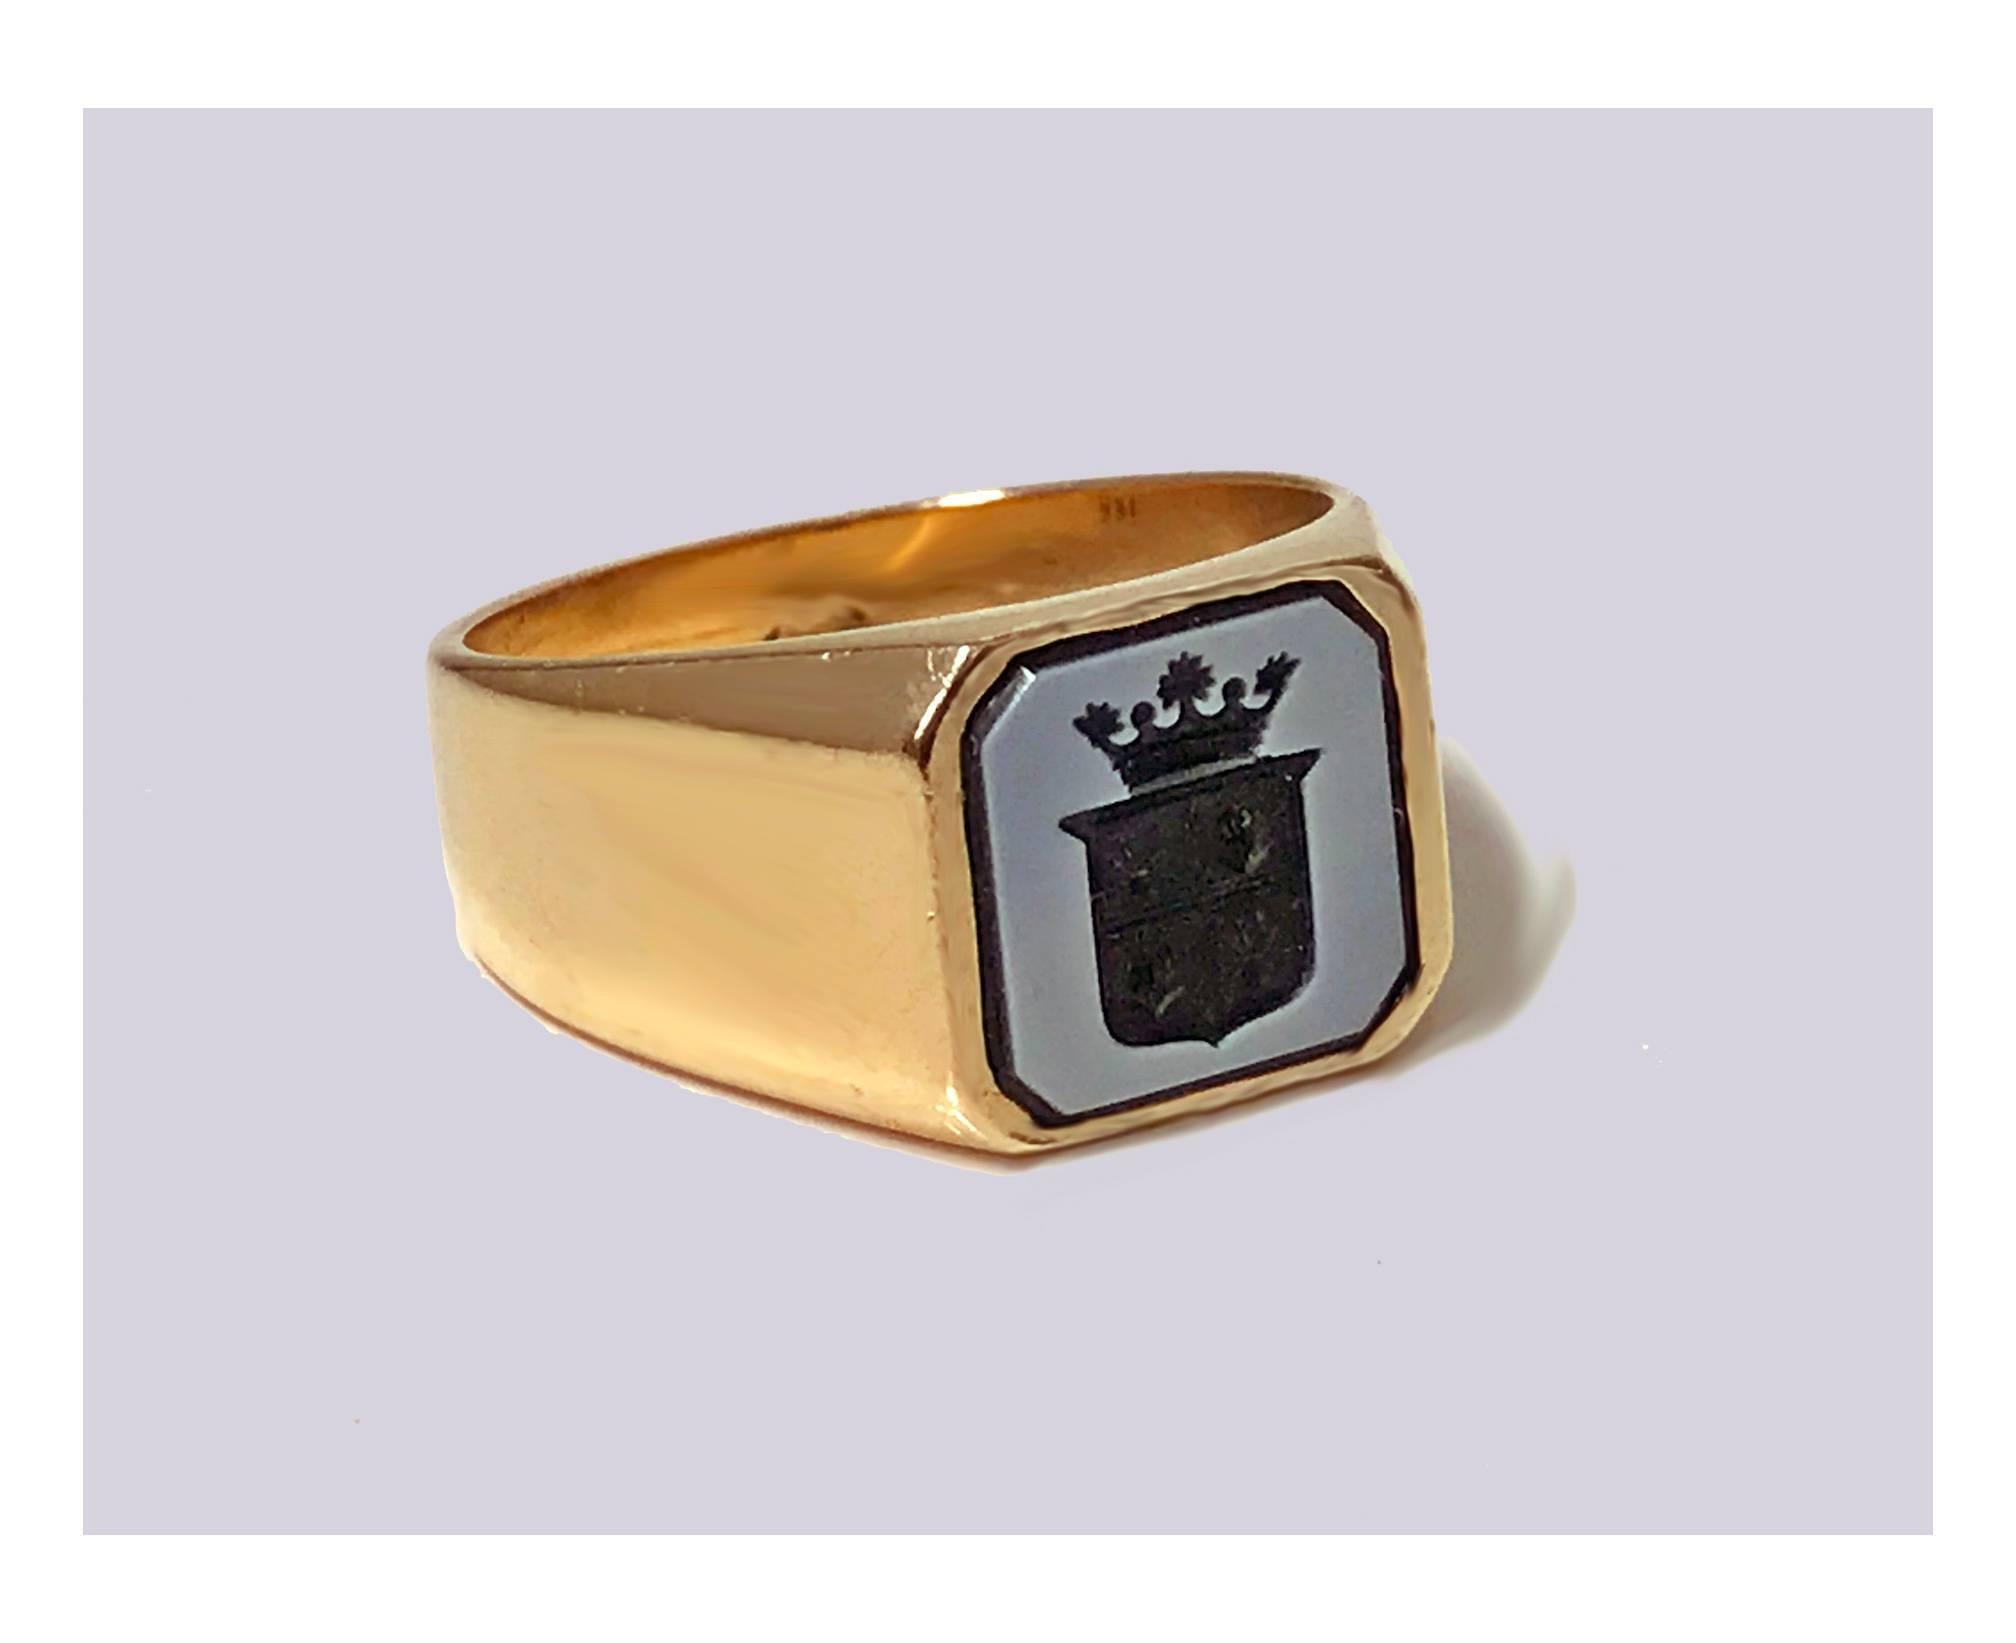 Antique gold sardonyx ring, circa 1890. Wonderful engraved coat of arms and coronet above, approximately 10.05 mm square, plain polished gold taperd mount. Stamped 14K. Ring Size: 10.75. May be sized. Item Weight: 11.46 grams.